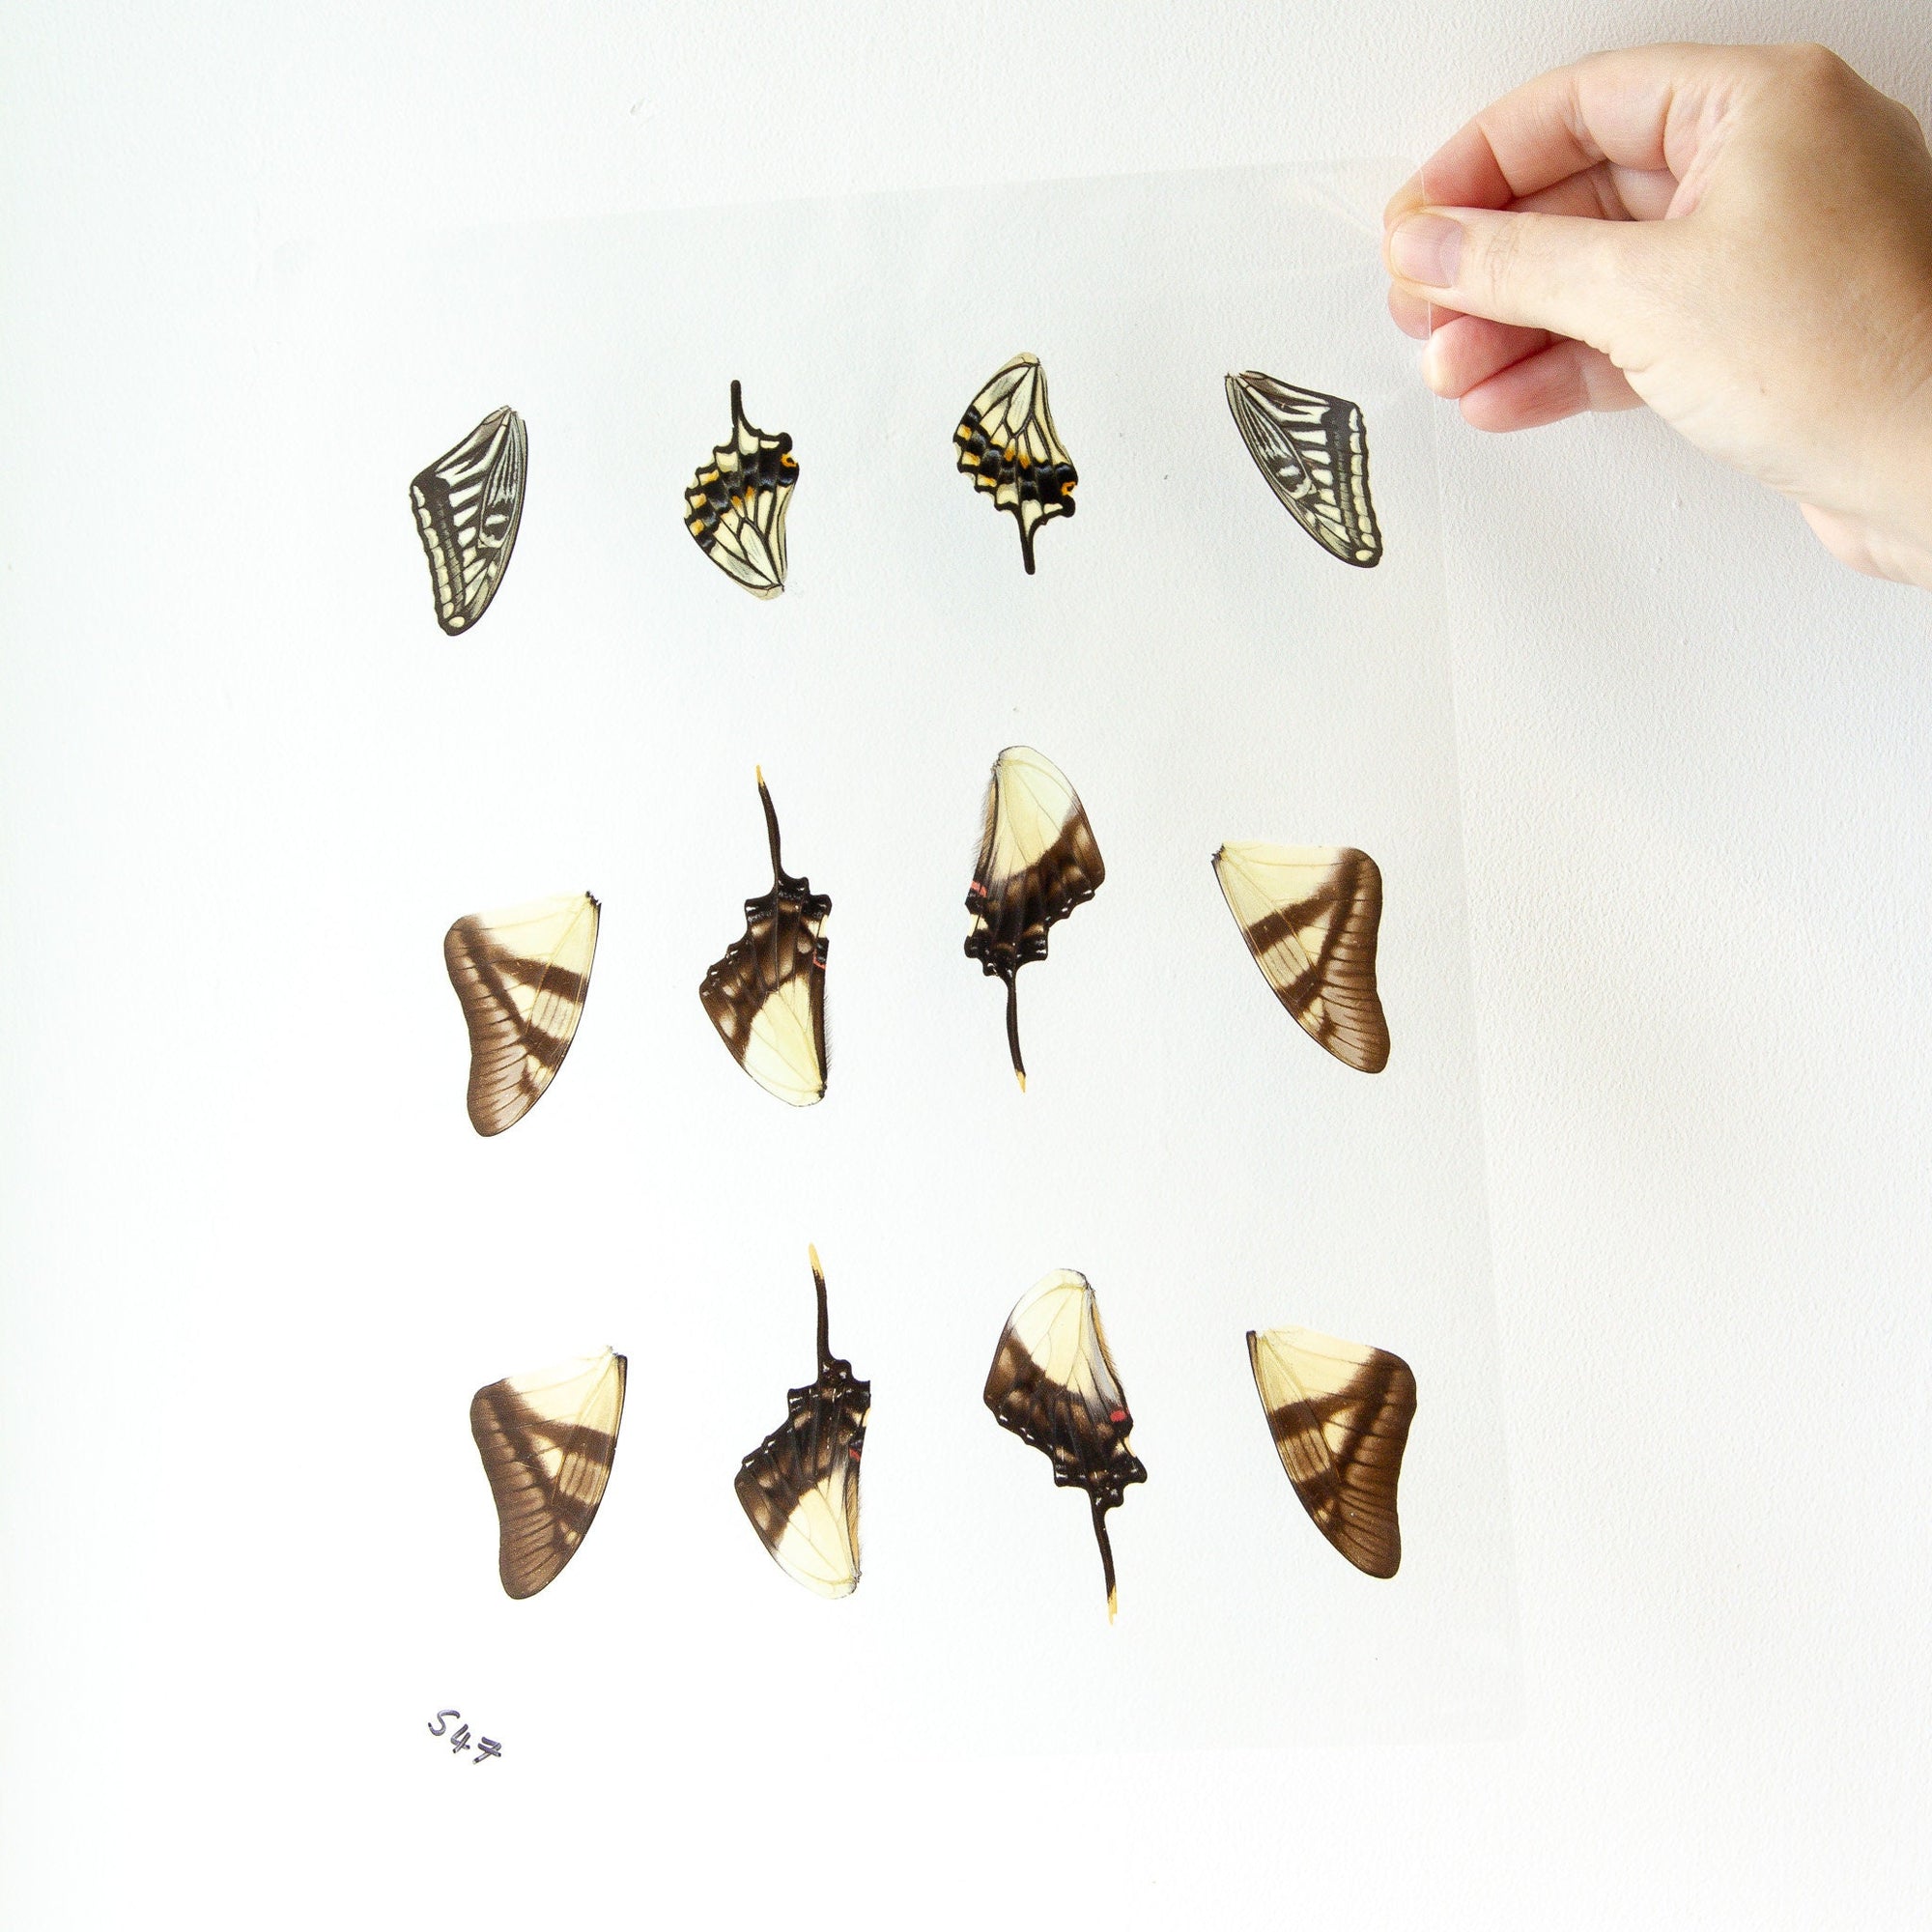 Butterfly Wings GLOSSY LAMINATED SHEET Real Ethically Sourced Specimens Moths Butterflies Wings for Art -- S47